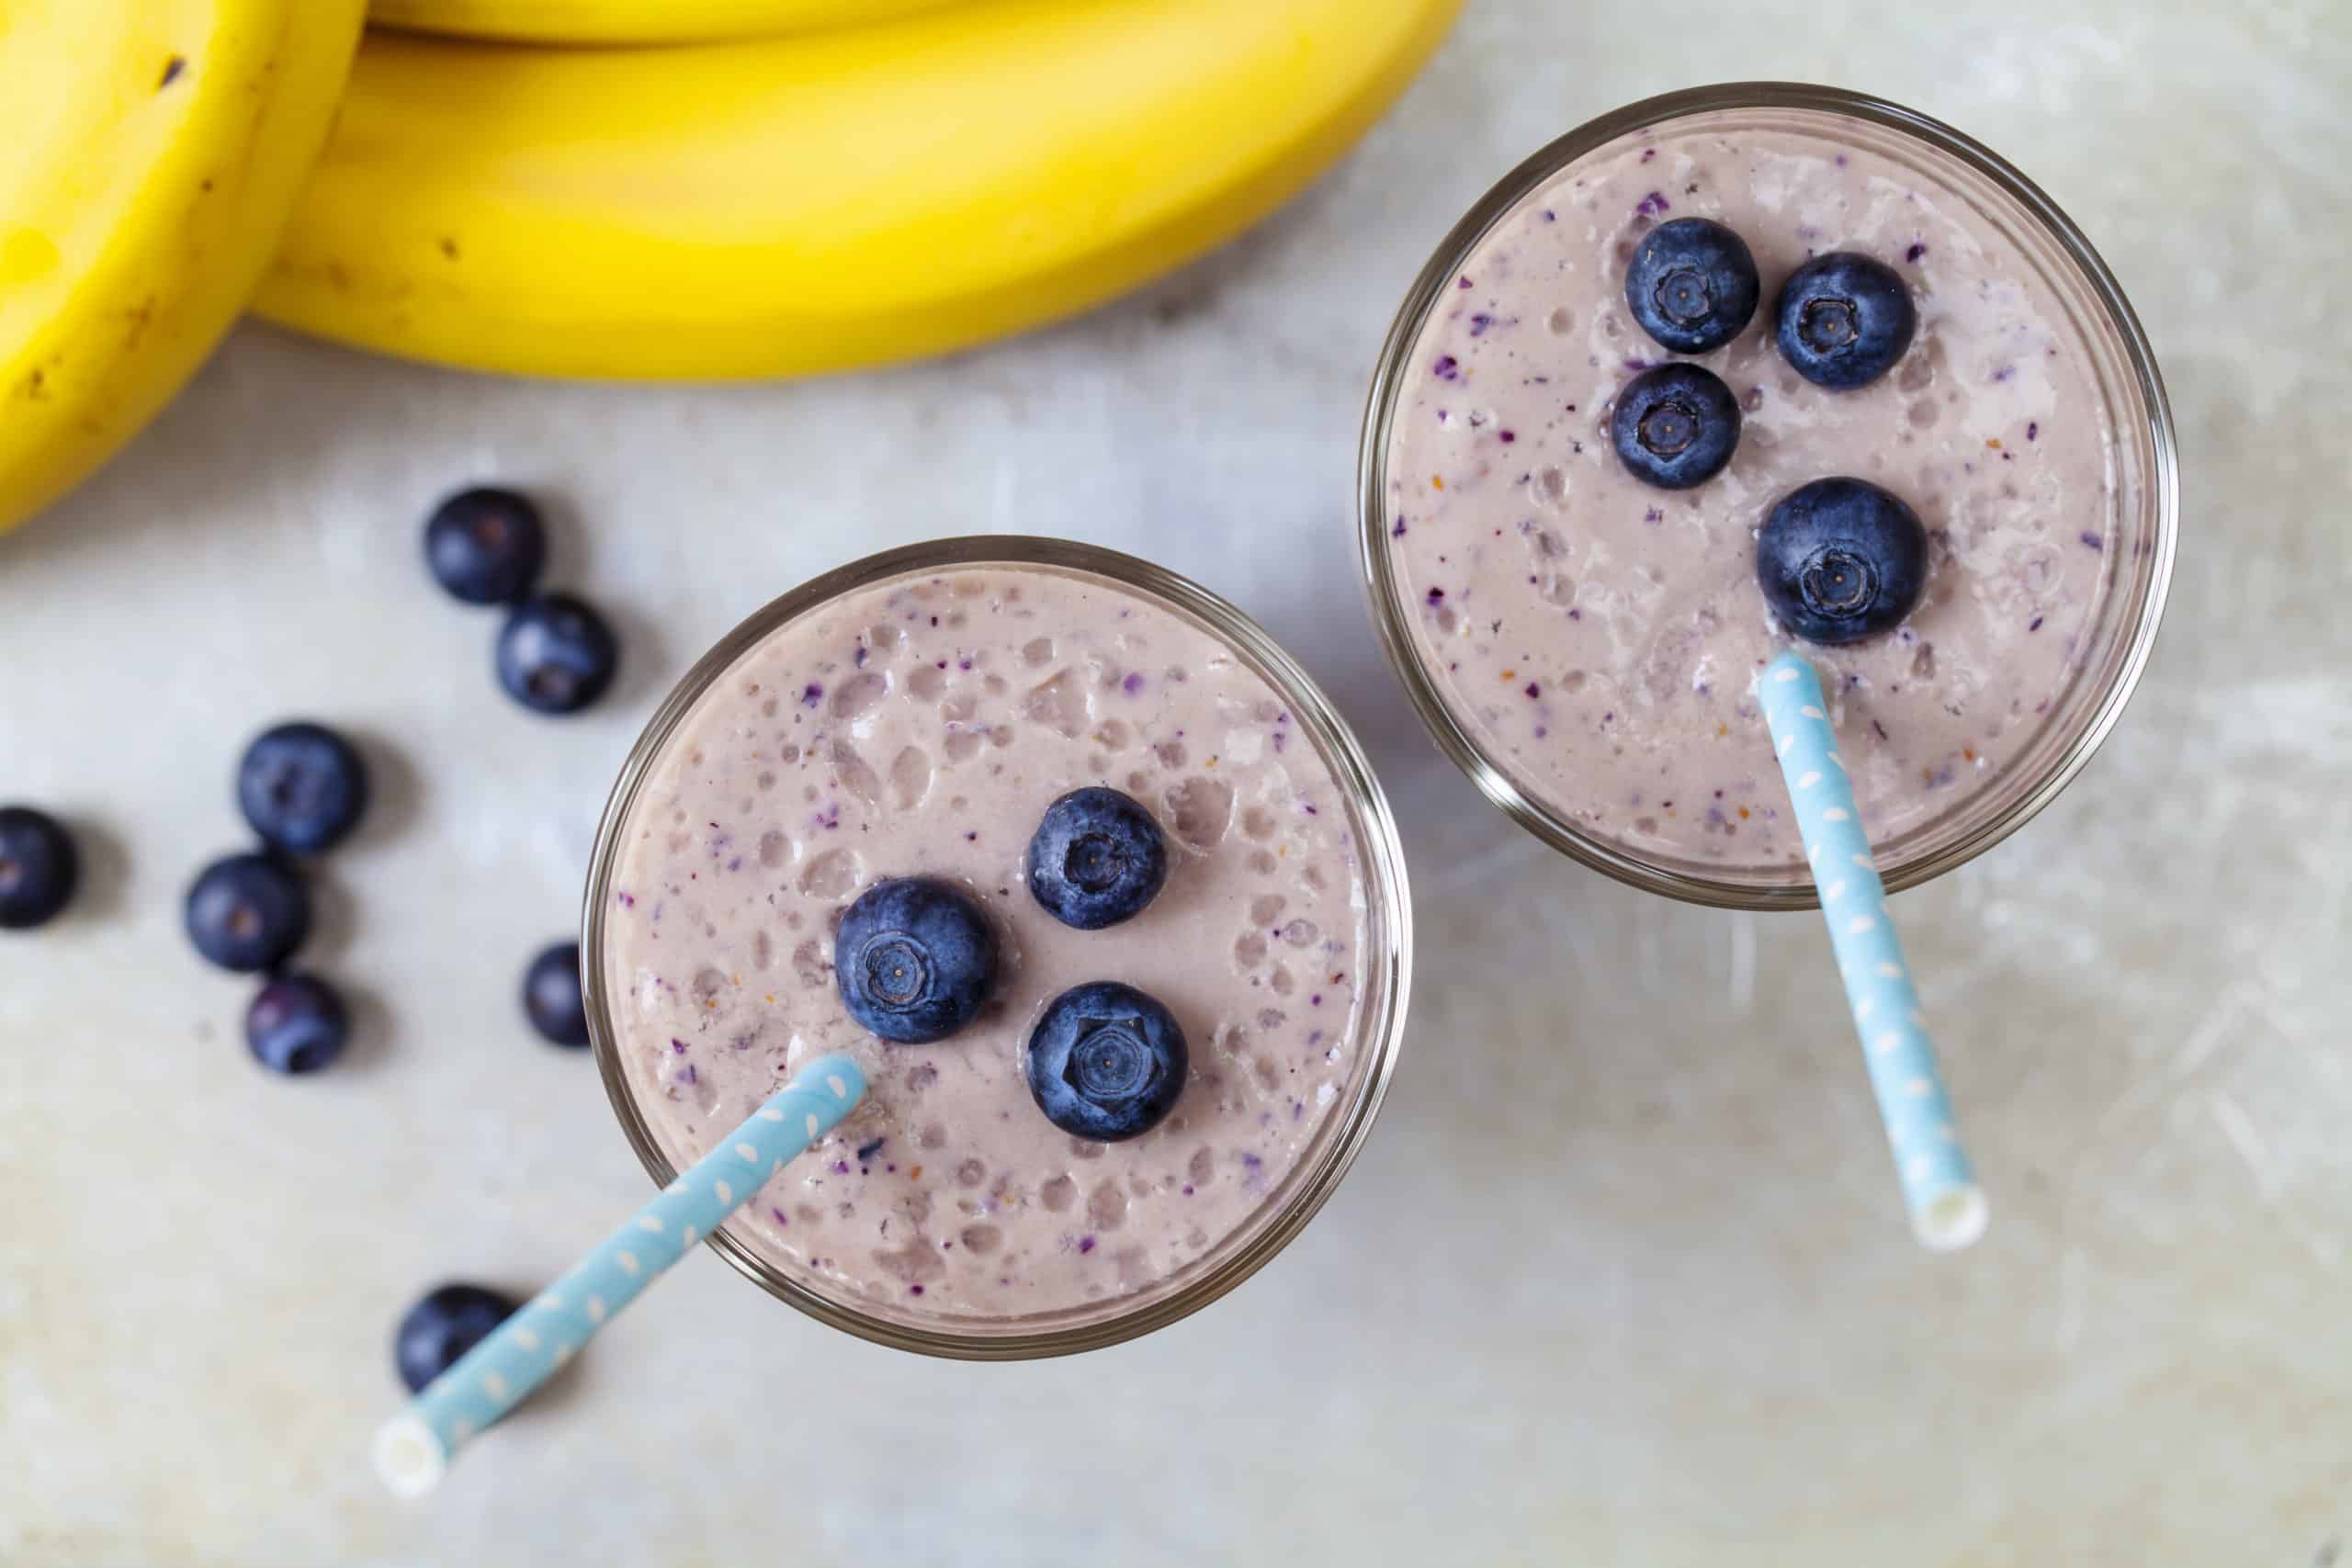 Banana, oat, and blueberry breakfast smoothie